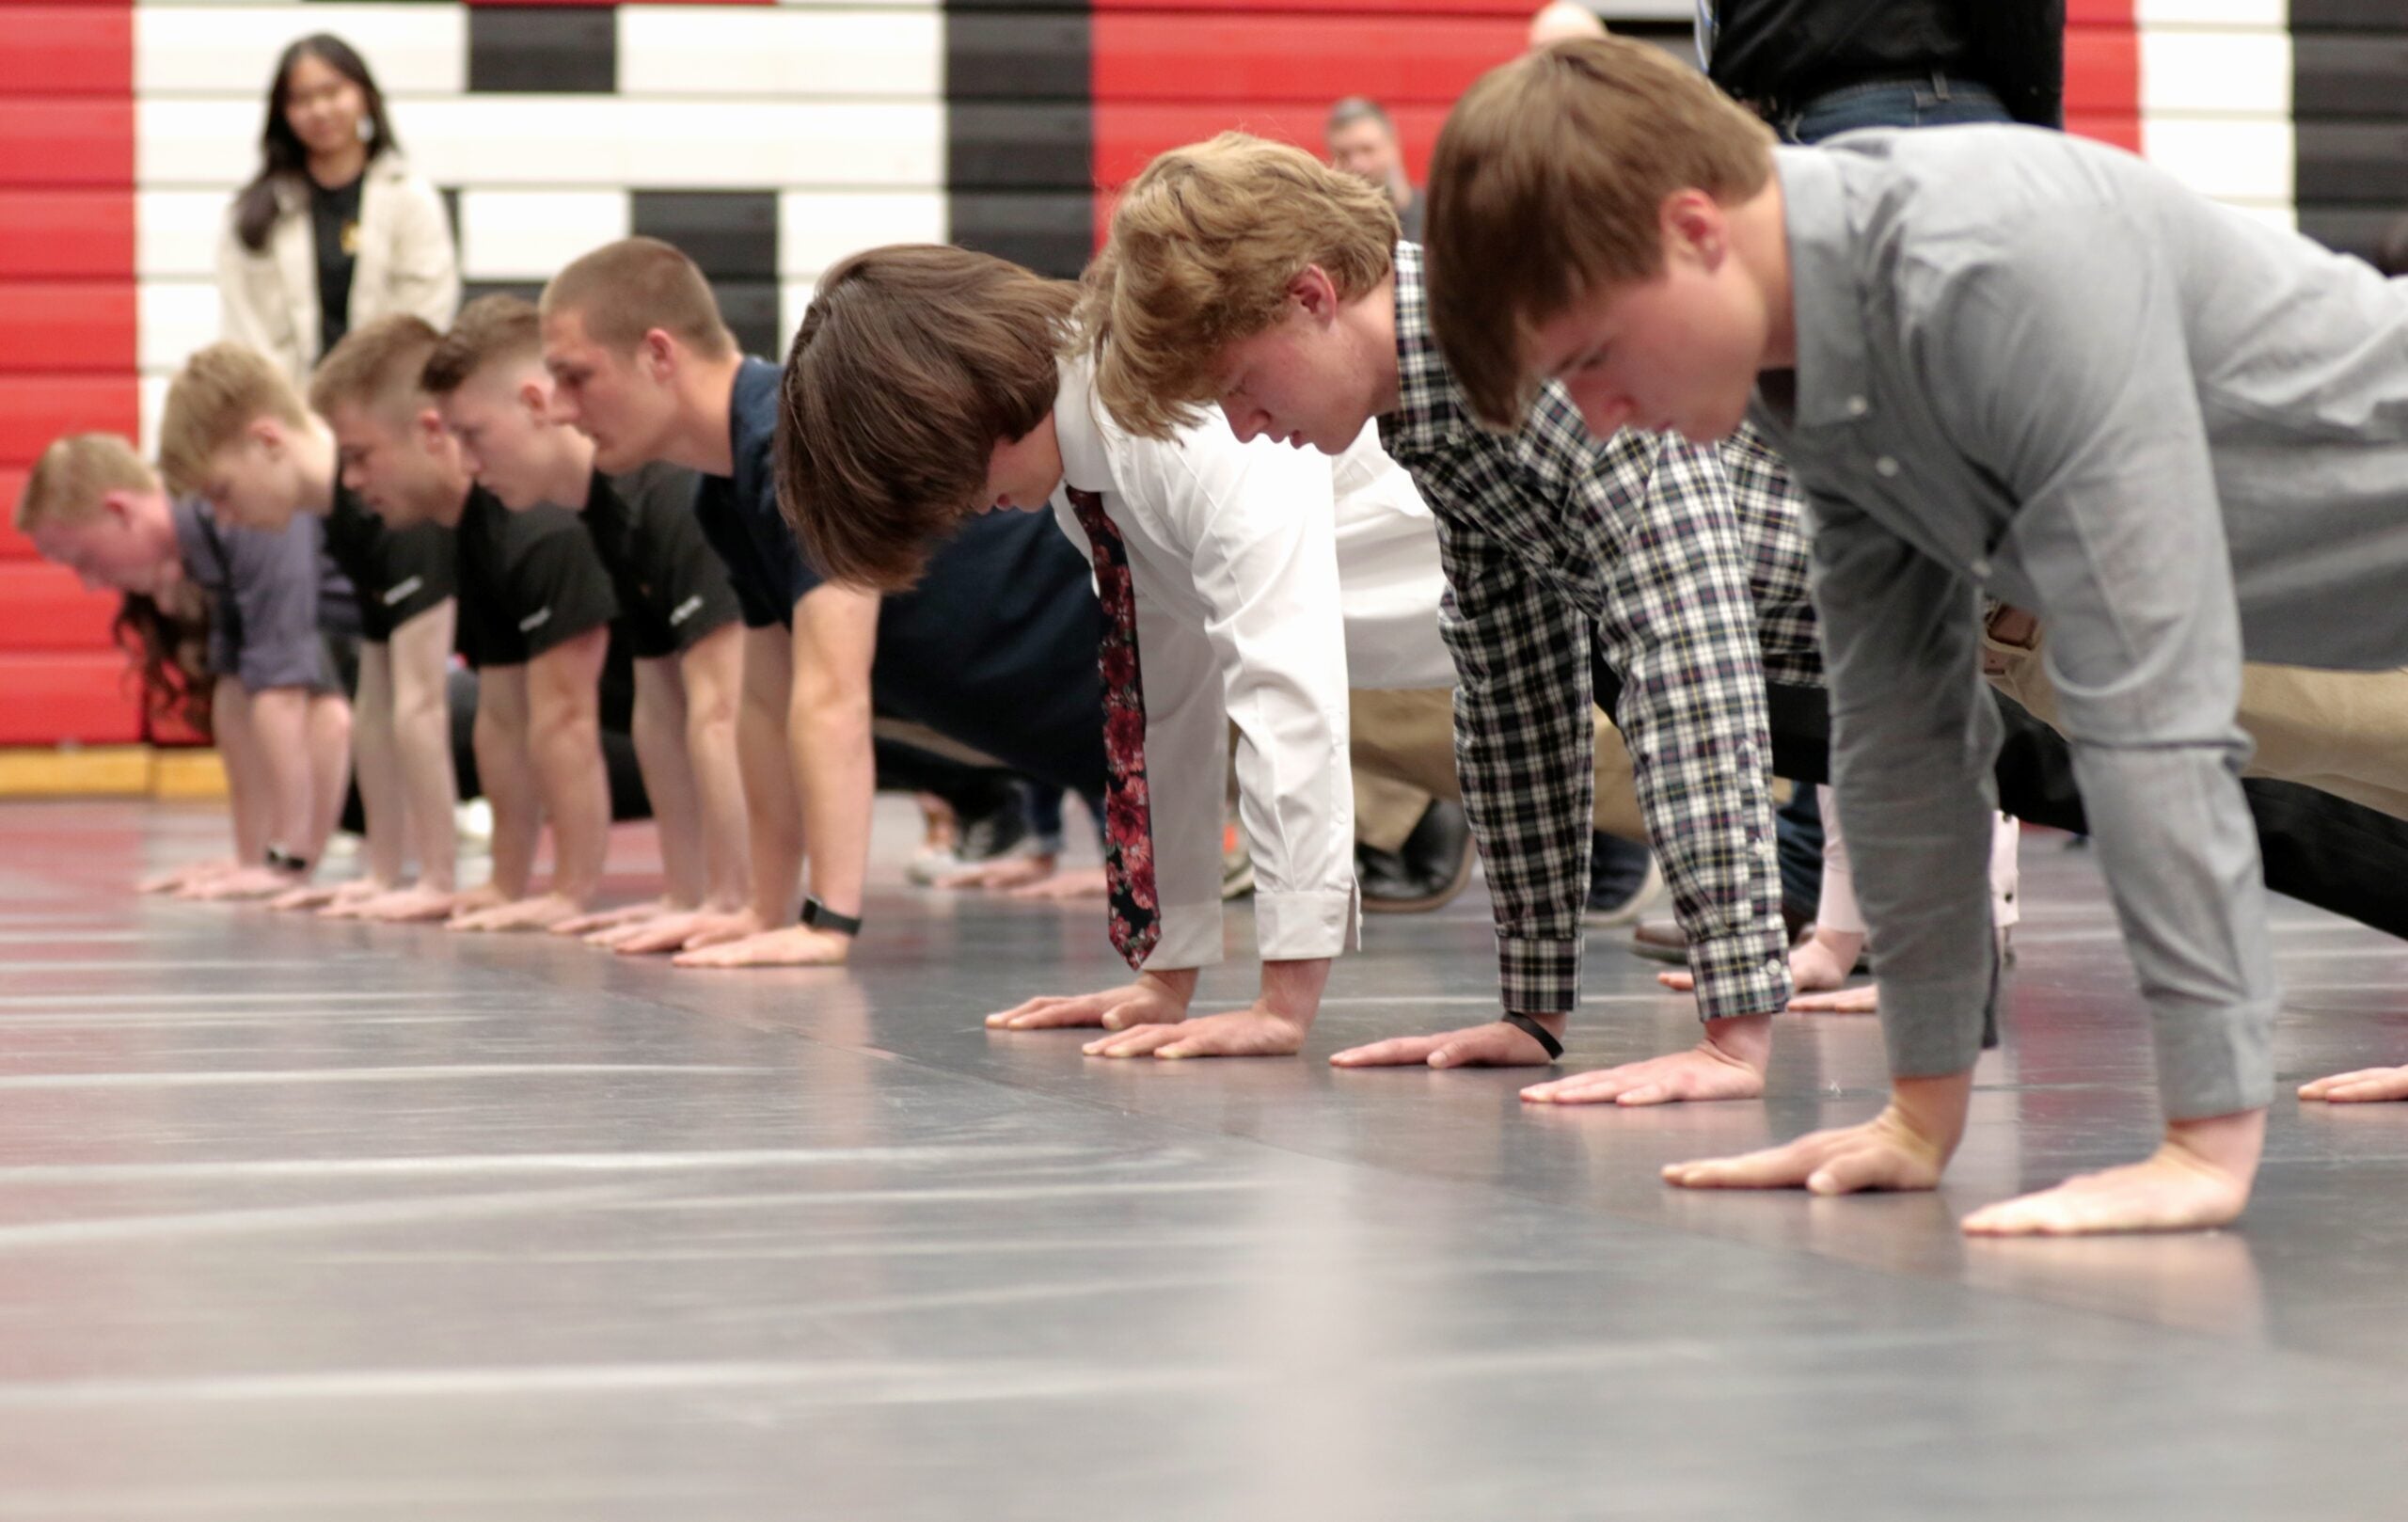 High school military recruits participate in a friendly push-up competition after receiving their oath of enlistment from Lt. Gen. Xavier Brunson, commander of America’s First Corps, at Saint Martin University, Lacey, Wash., May 3, 2022. Recruits were treated to a buffet-style dinner after the oath of enlistment, with family and friends also in attendance. (U.S. Army photo by Spc. Richard Carlisi, I Corps)